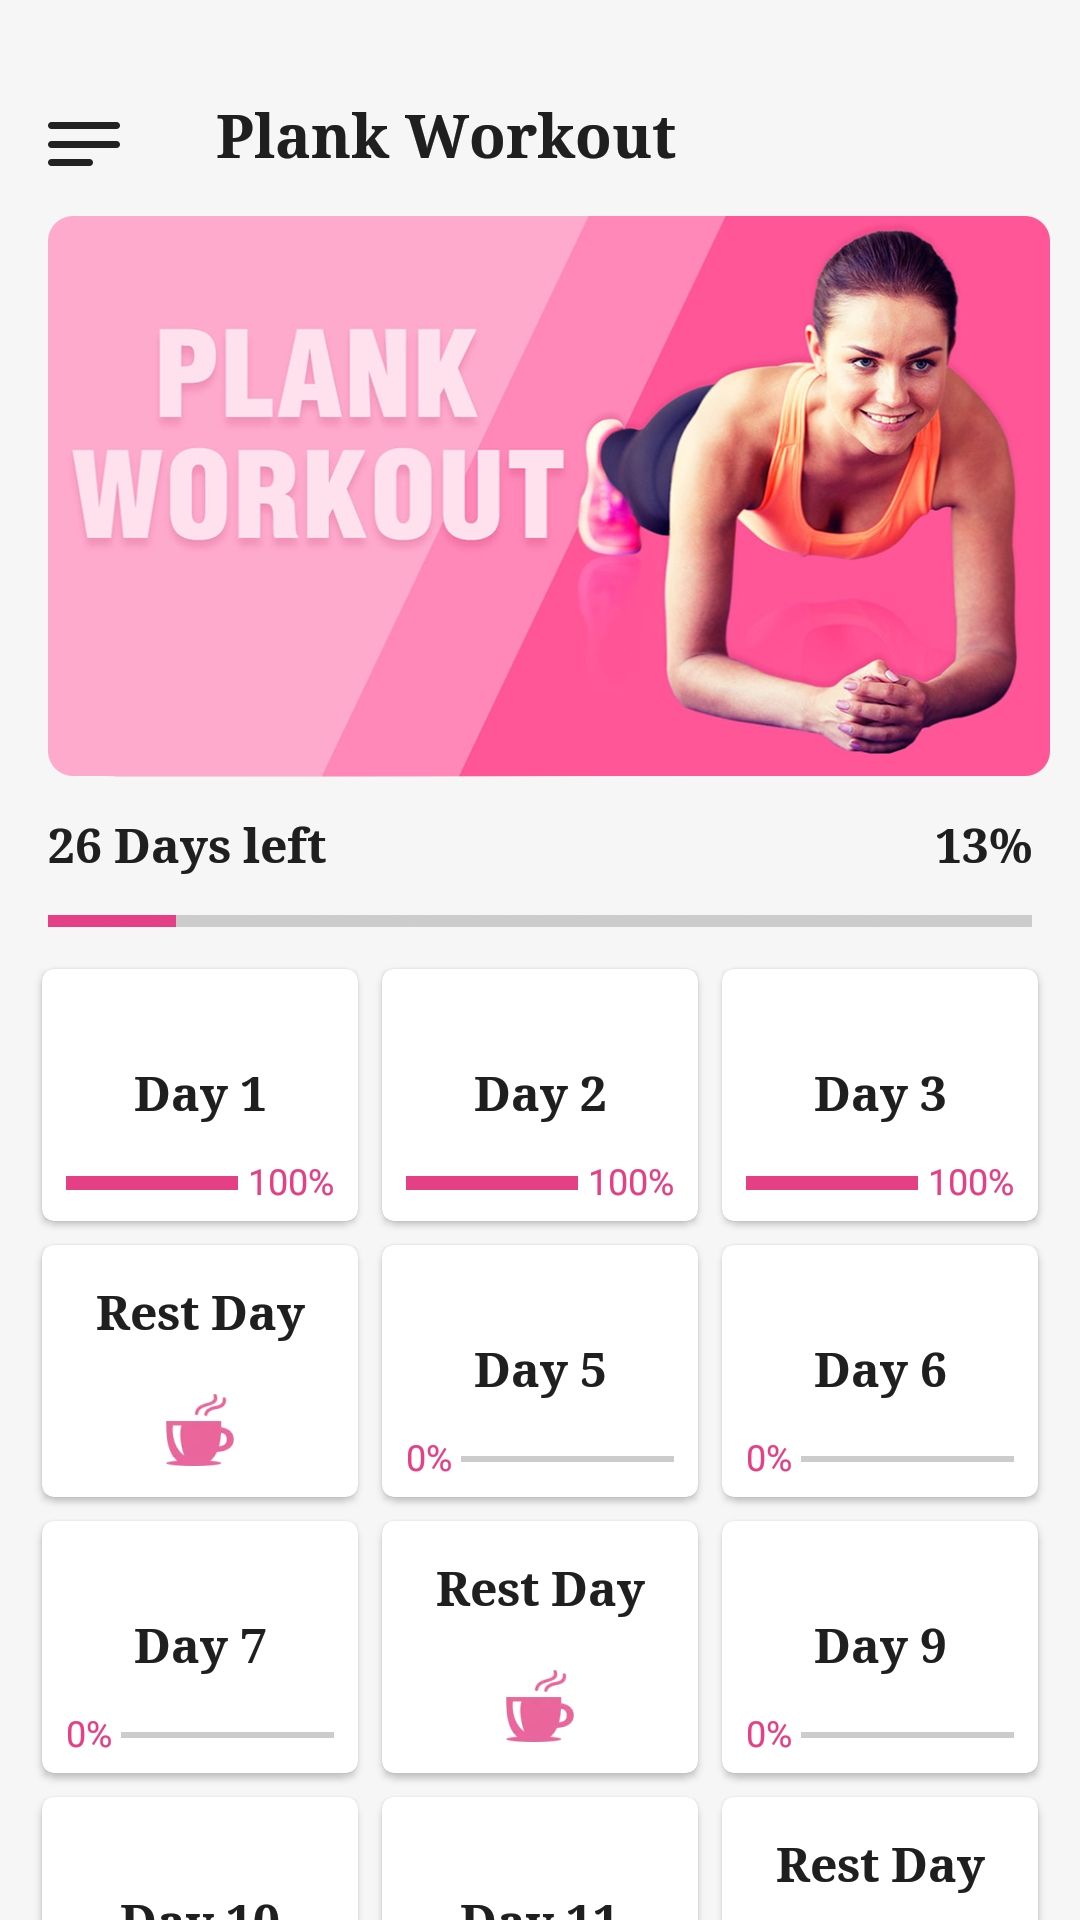 Plank Workout mobile exercise app plan